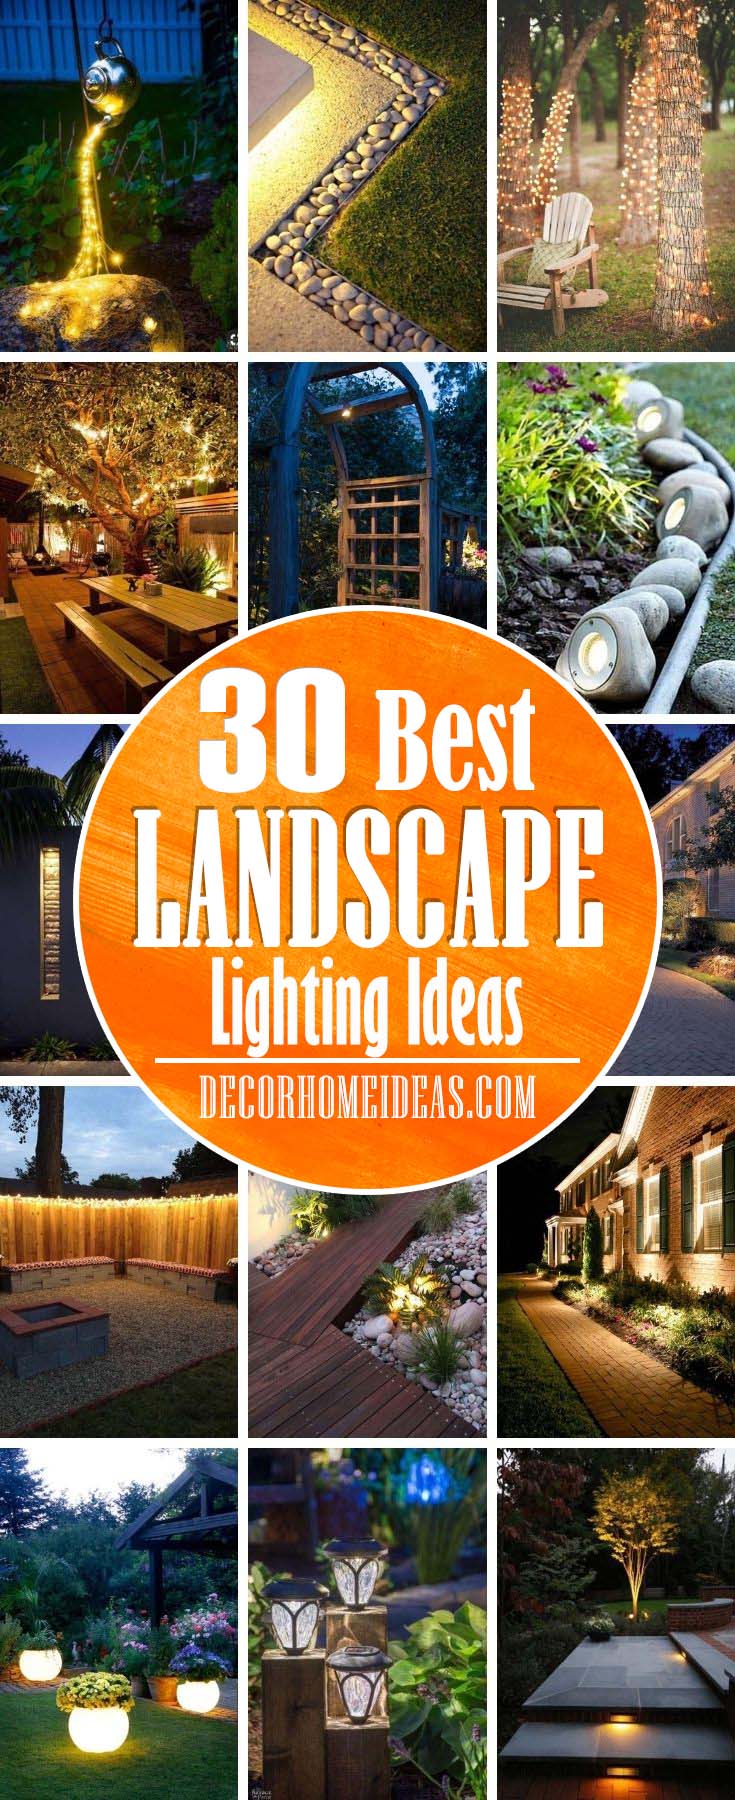 18 Awesome Landscape Lighting Ideas For Your Home and Yard   Decor ...